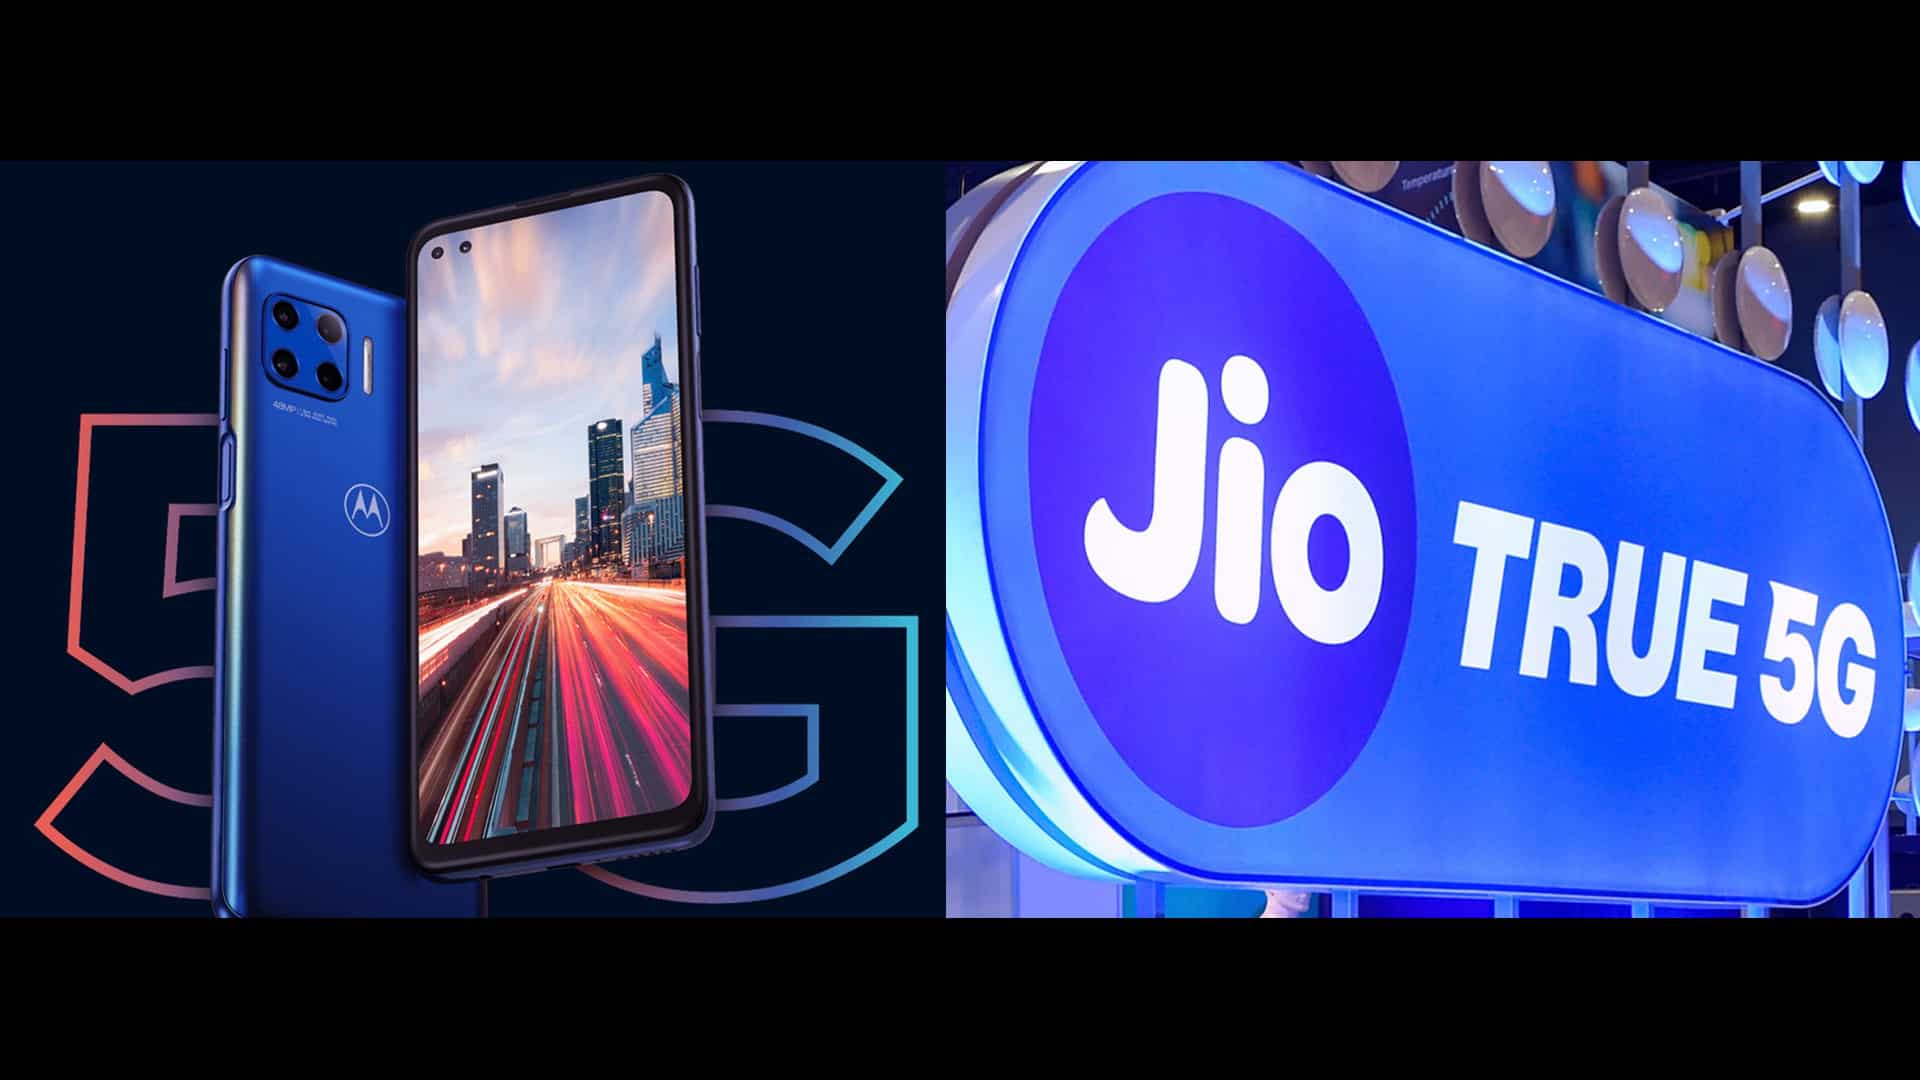 Motorola Partners with Reliance Jio to Enable True 5G Across Its Extensive 5G Smartphone Portfolio in India